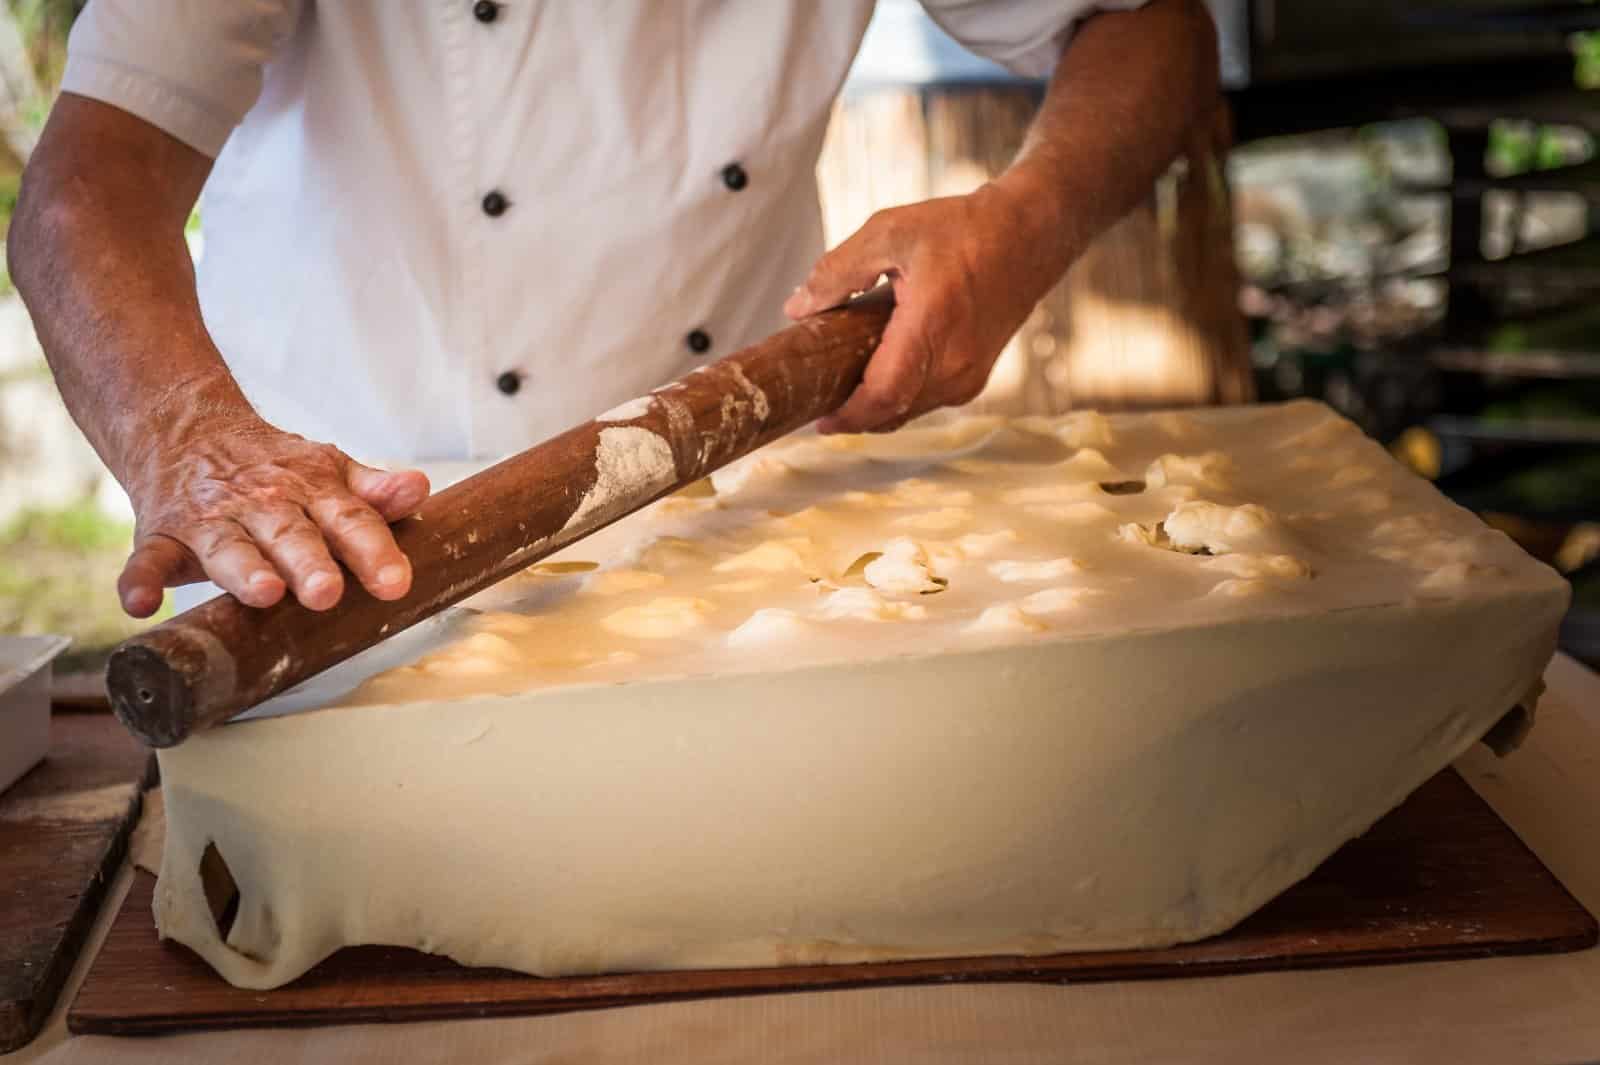 Image Credit: Shutterstock / lullaby7 <p><span>Indulge in focaccia di Recco, a Ligurian specialty that’s sure to tantalize your taste buds with its delicate layers of thin dough and creamy cheese. Unlike traditional focaccia, this version features two paper-thin sheets of dough filled with tangy stracchino cheese, creating a heavenly combination of crispy crust and molten cheese. Sample this culinary masterpiece at a local trattoria or bakery in Recco, where it’s been a beloved tradition for centuries.</span></p>